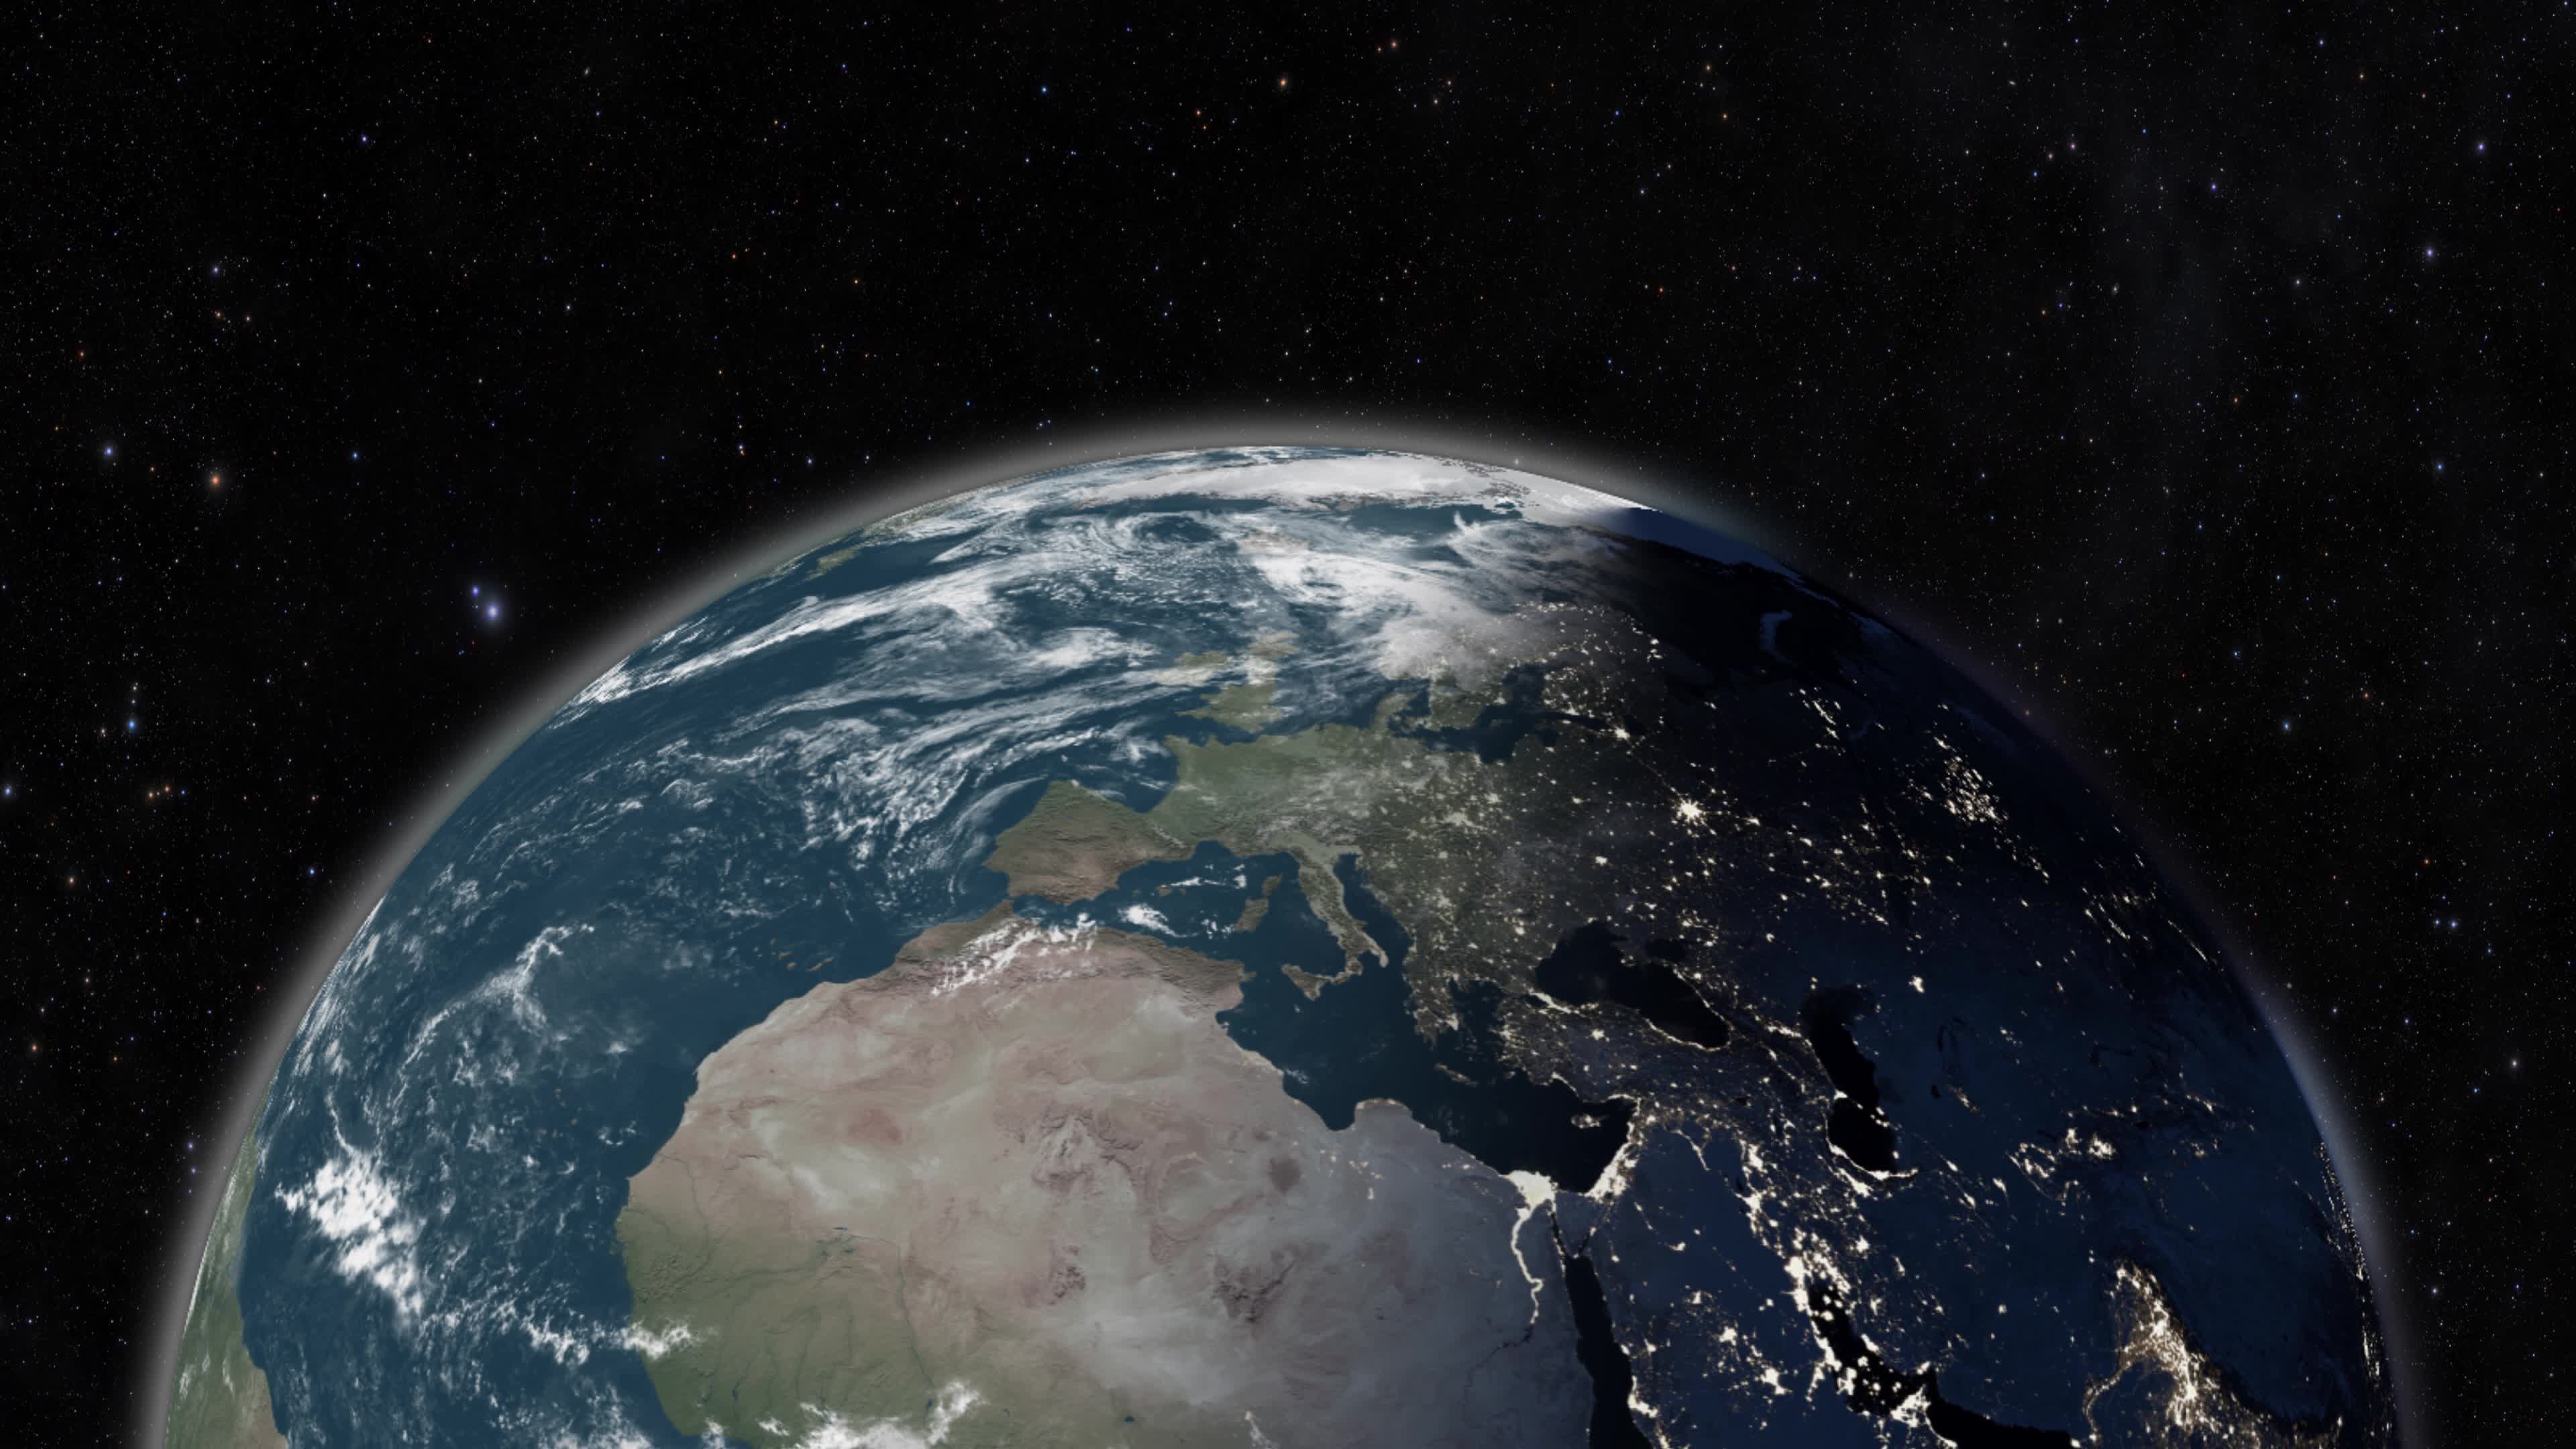 Rotating Earth Wallpaper HD - Apps on Google Play